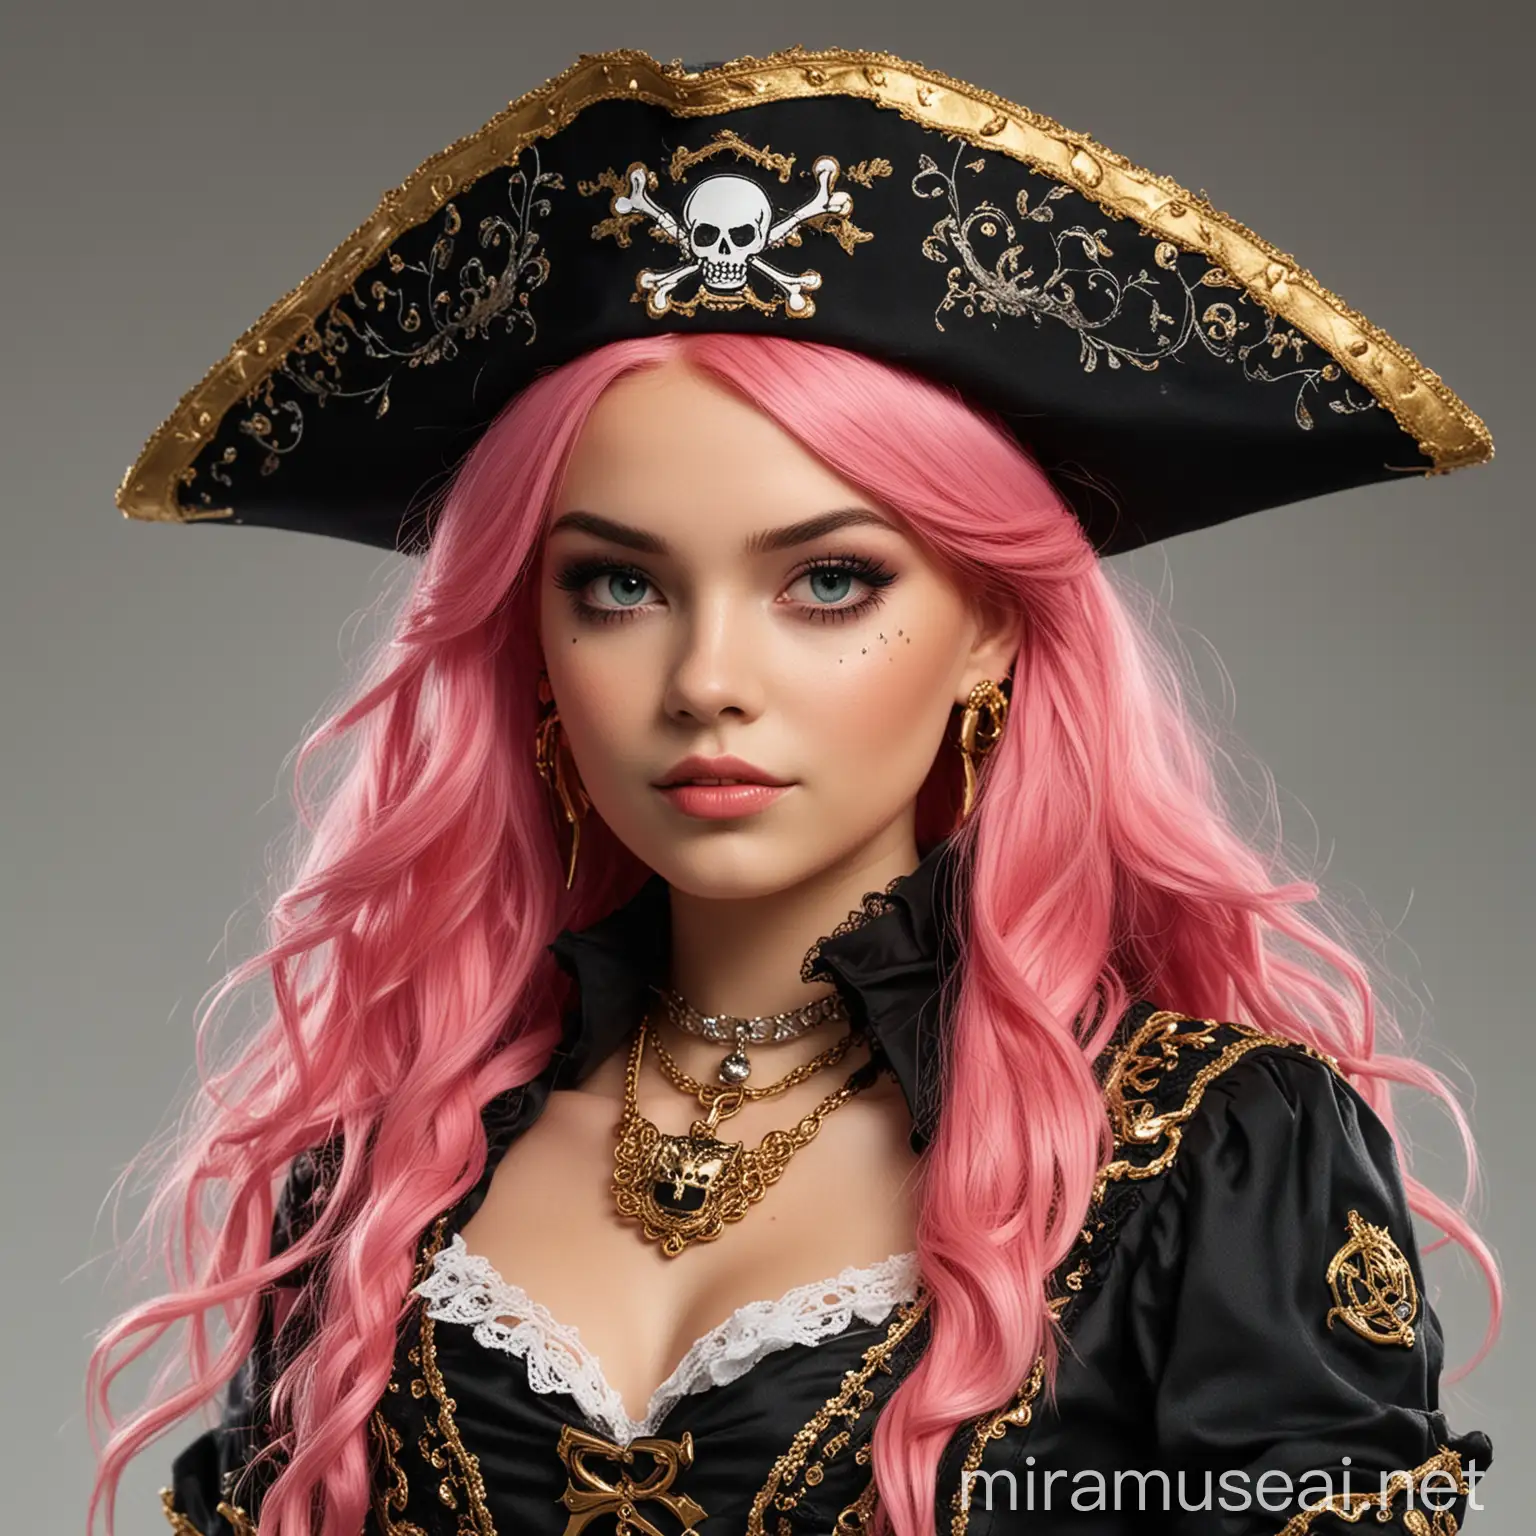 Pirate Girl with Black Hat and Decorative Gun in Confident Pose